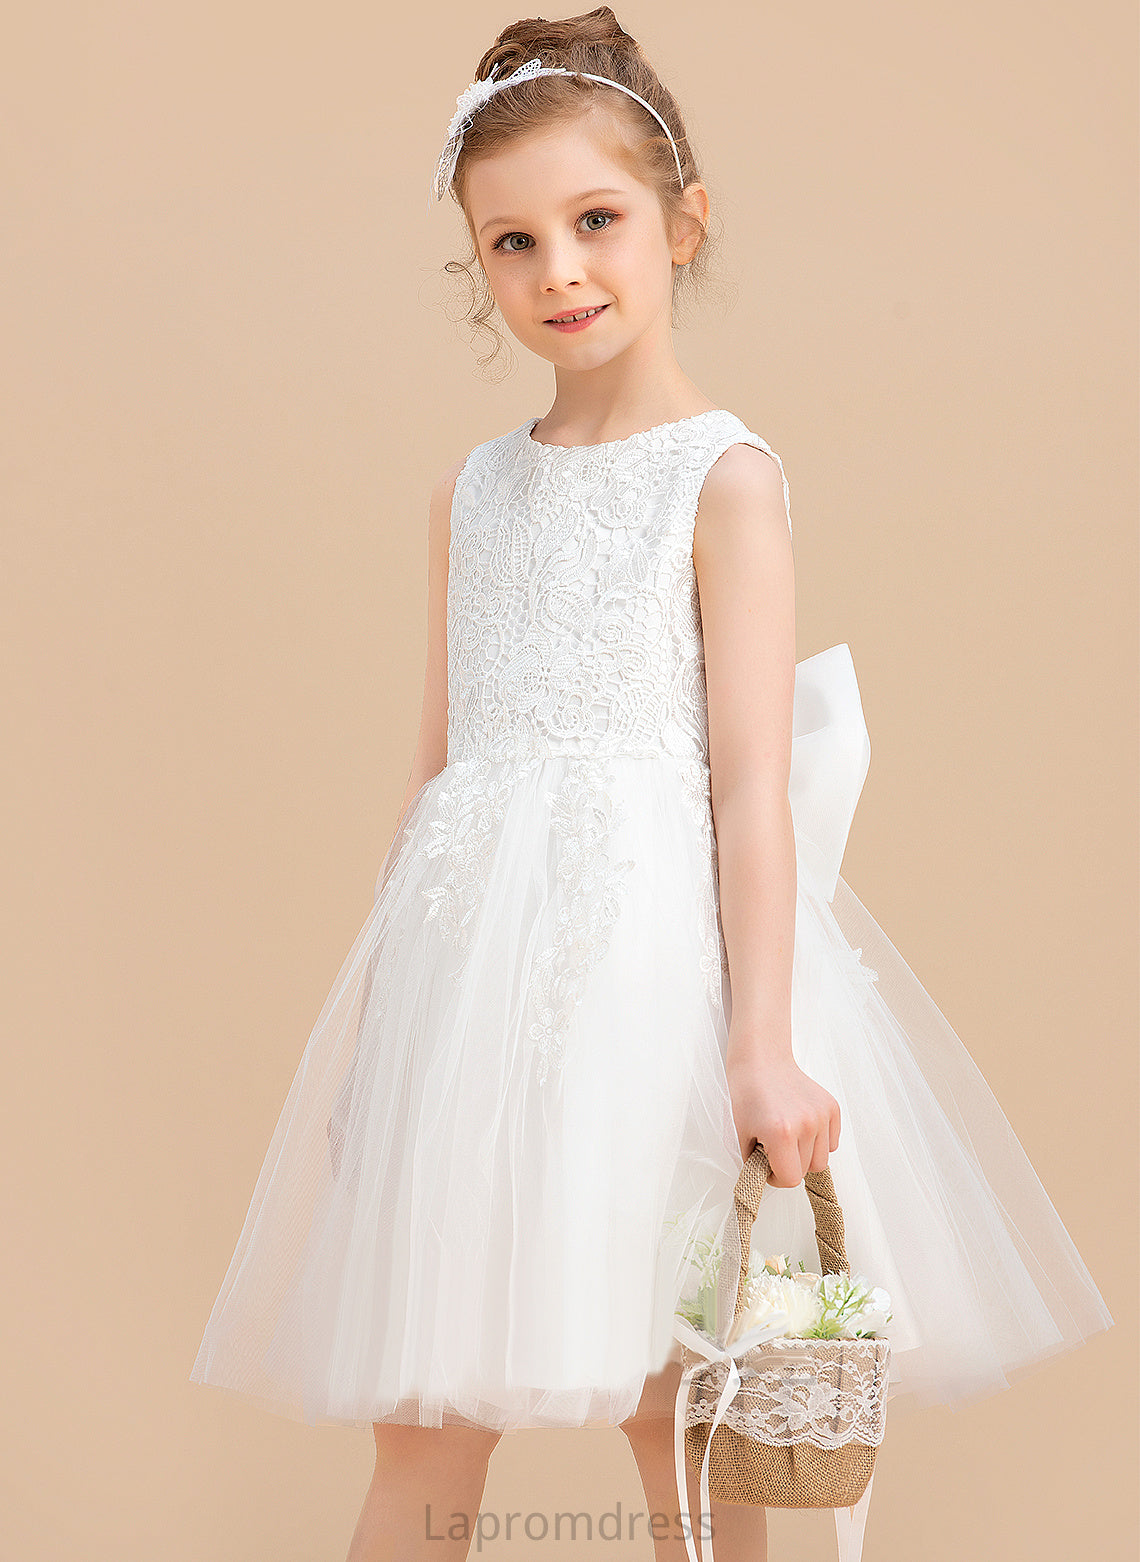 Girl Sleeveless Scoop Lucile Neck Tulle/Lace Lace/Bow(s) Flower Knee-length Dress Flower Girl Dresses - A-Line With